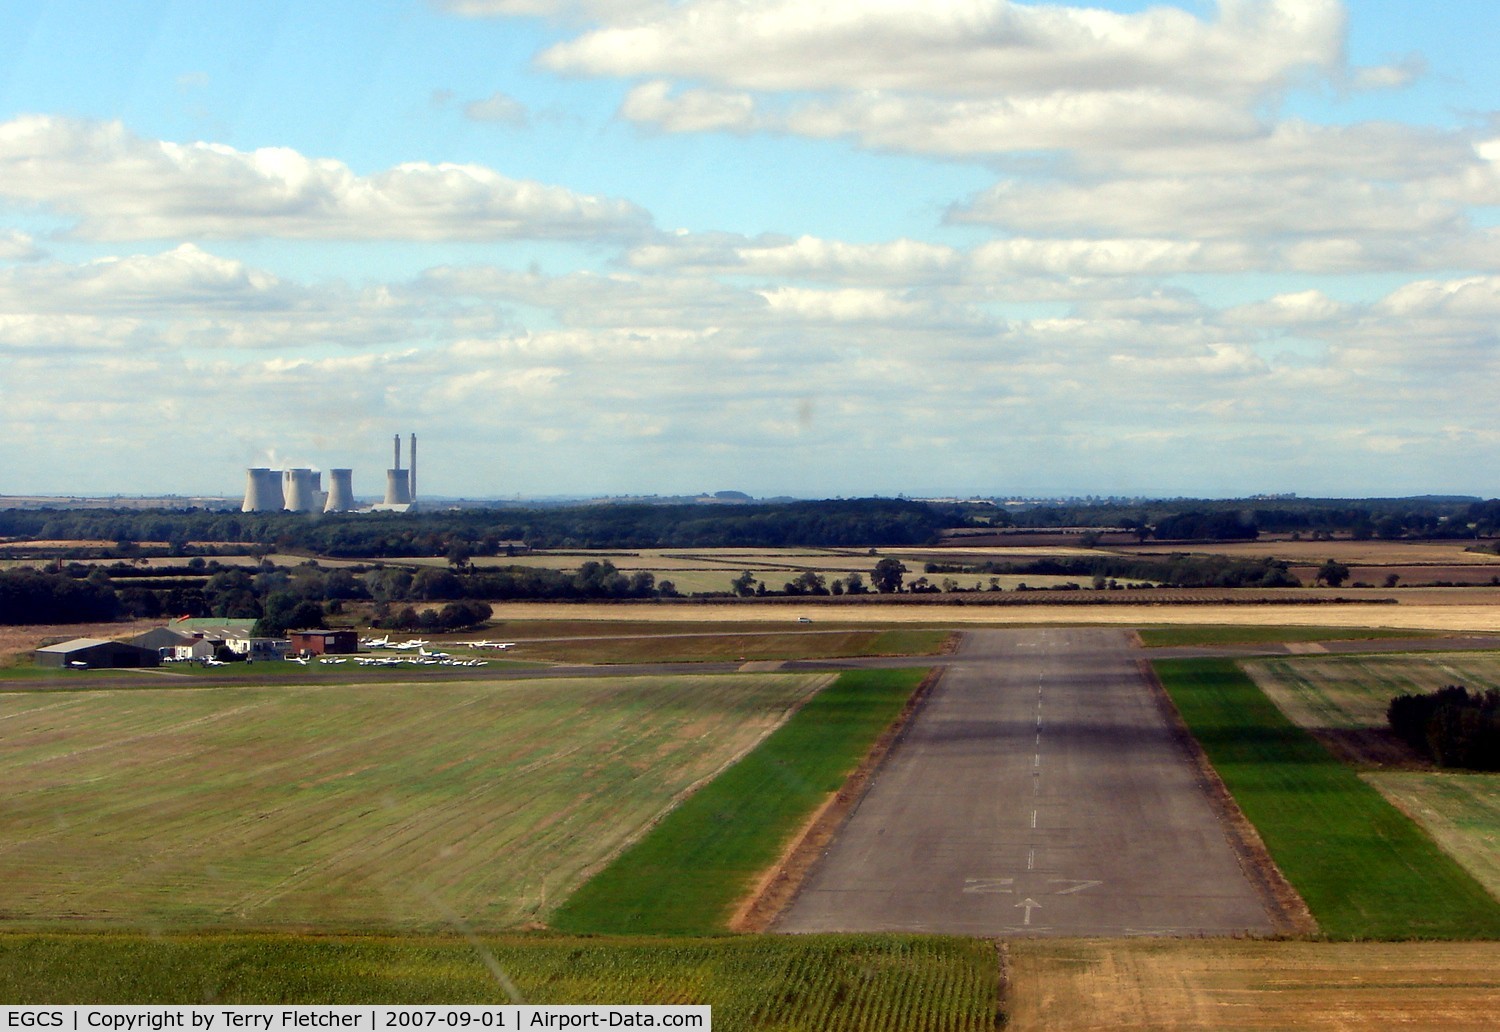 Sturgate Airfield Airport, Lincoln, England United Kingdom (EGCS) - Lining up for approach to Runway 27 at Sturgate